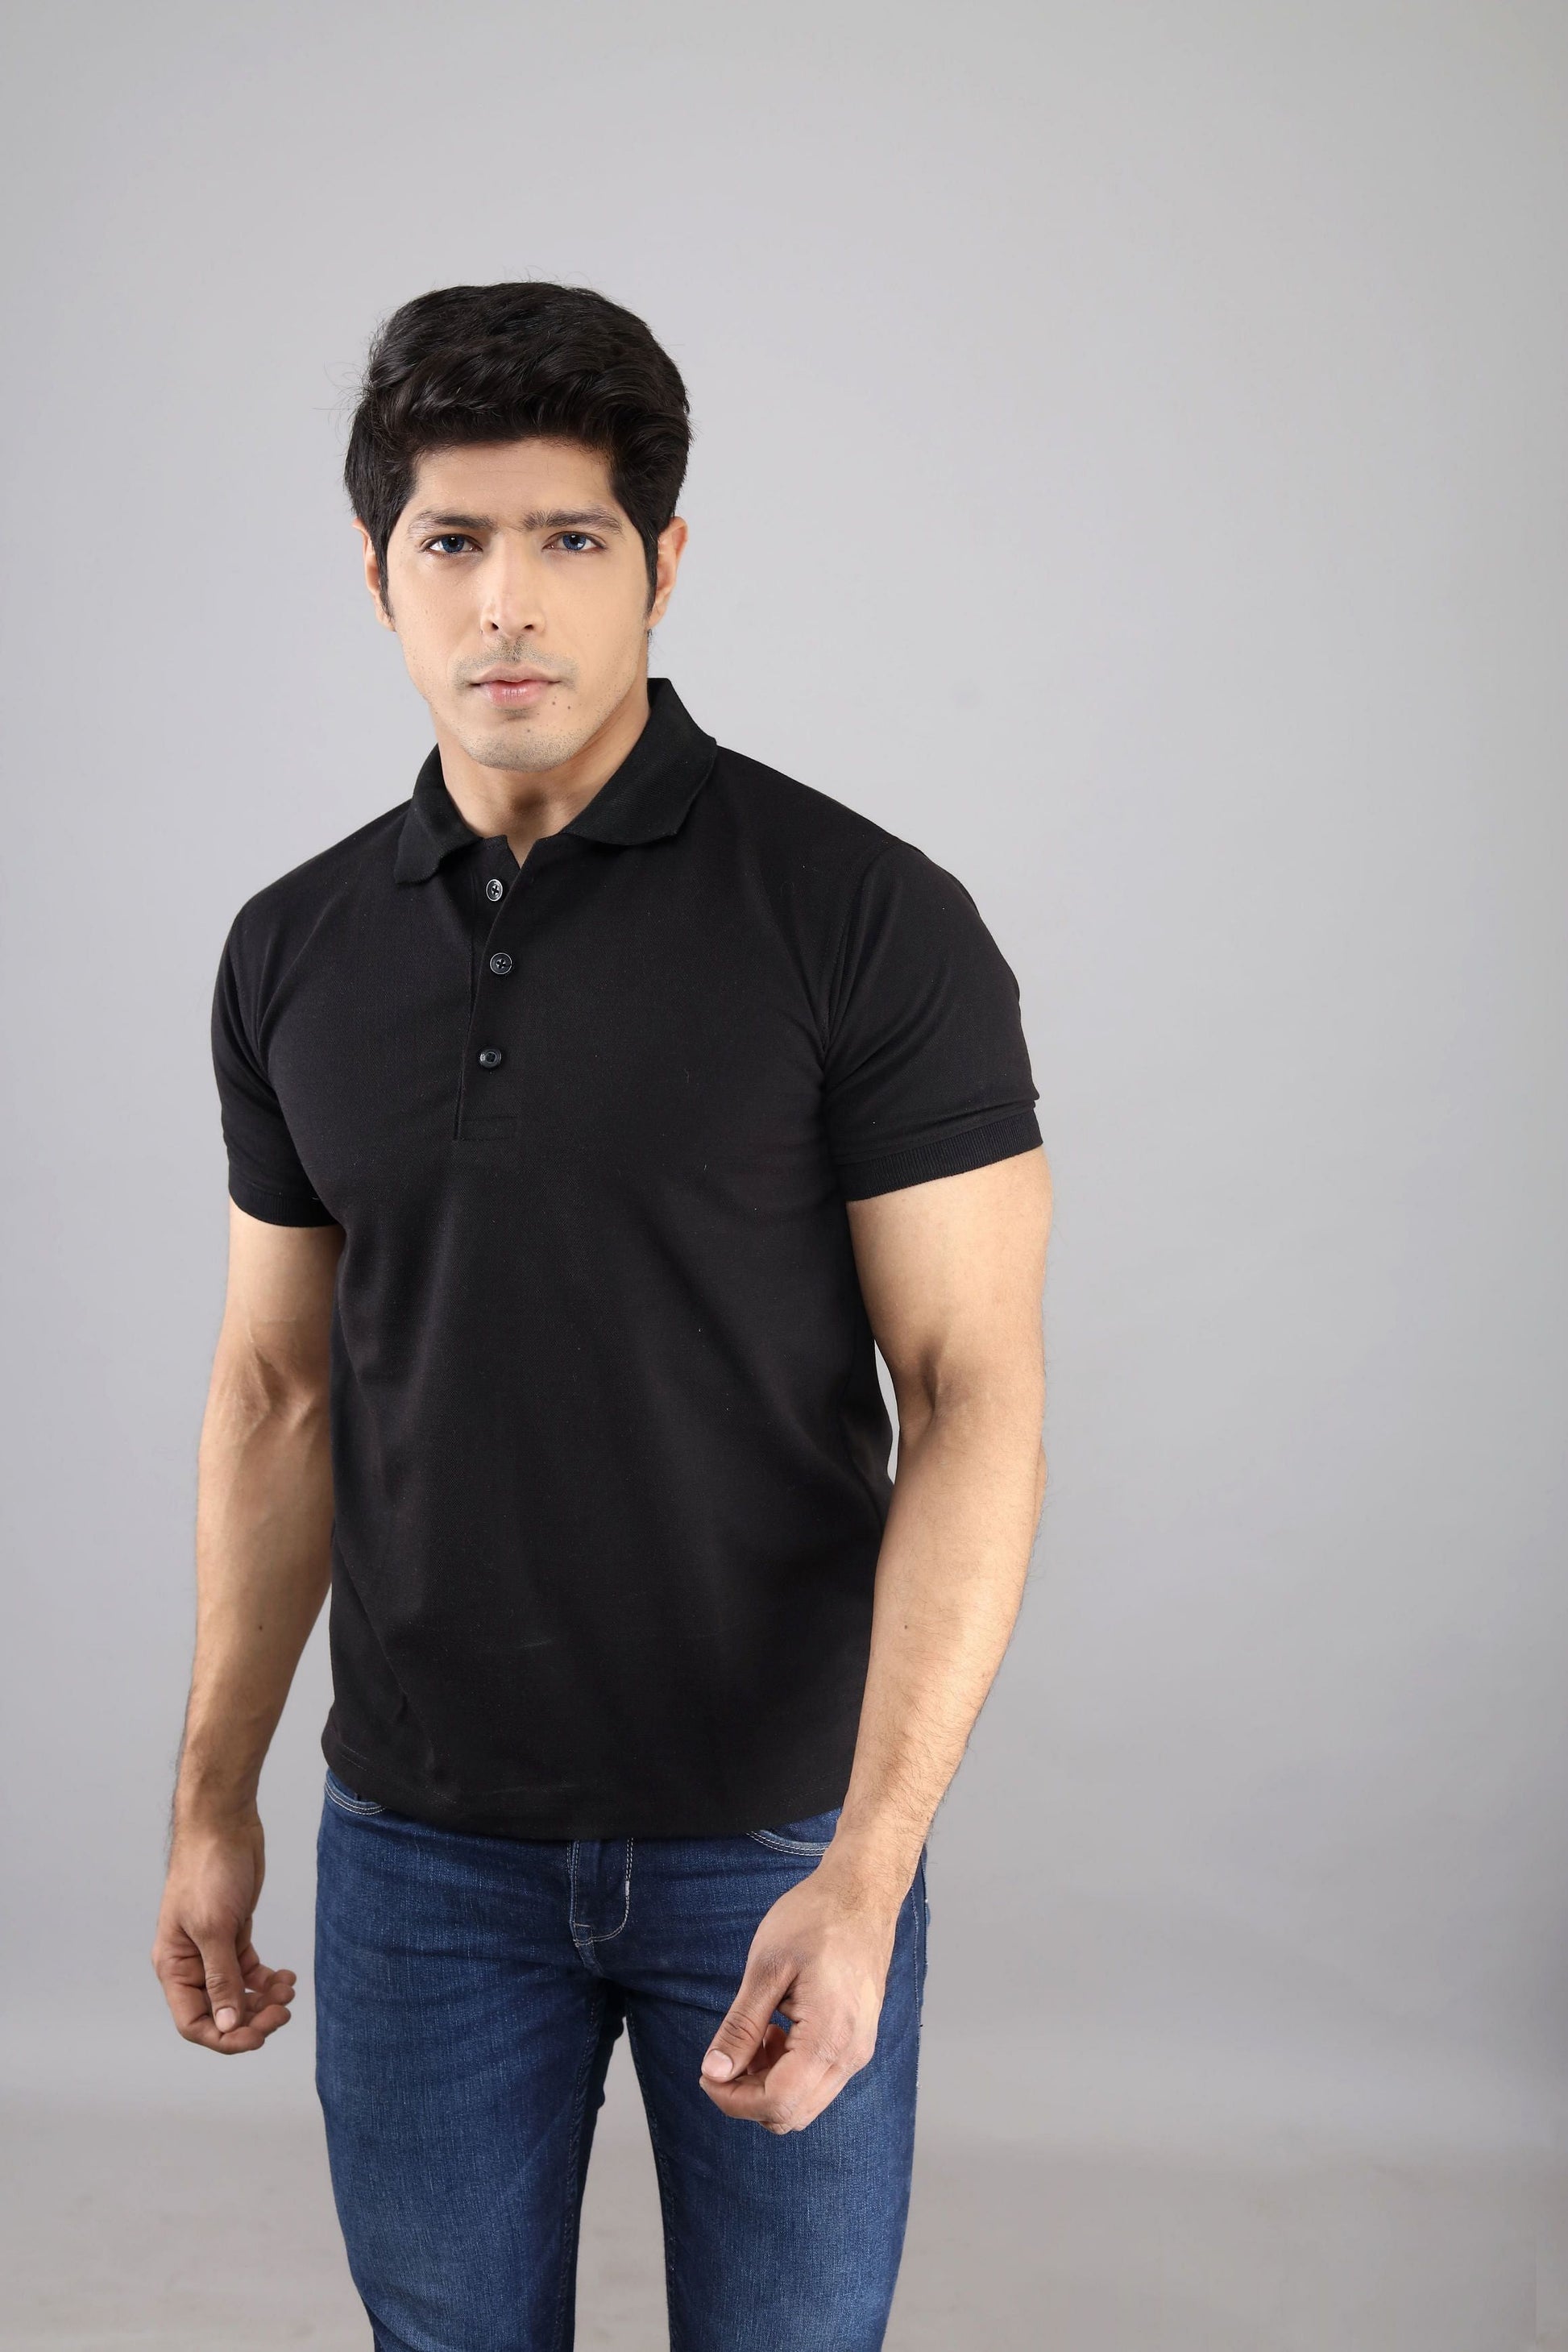 Black Polo T Shirt | Polo T Shirts for Men | Polo T Shirts – Indian Threads